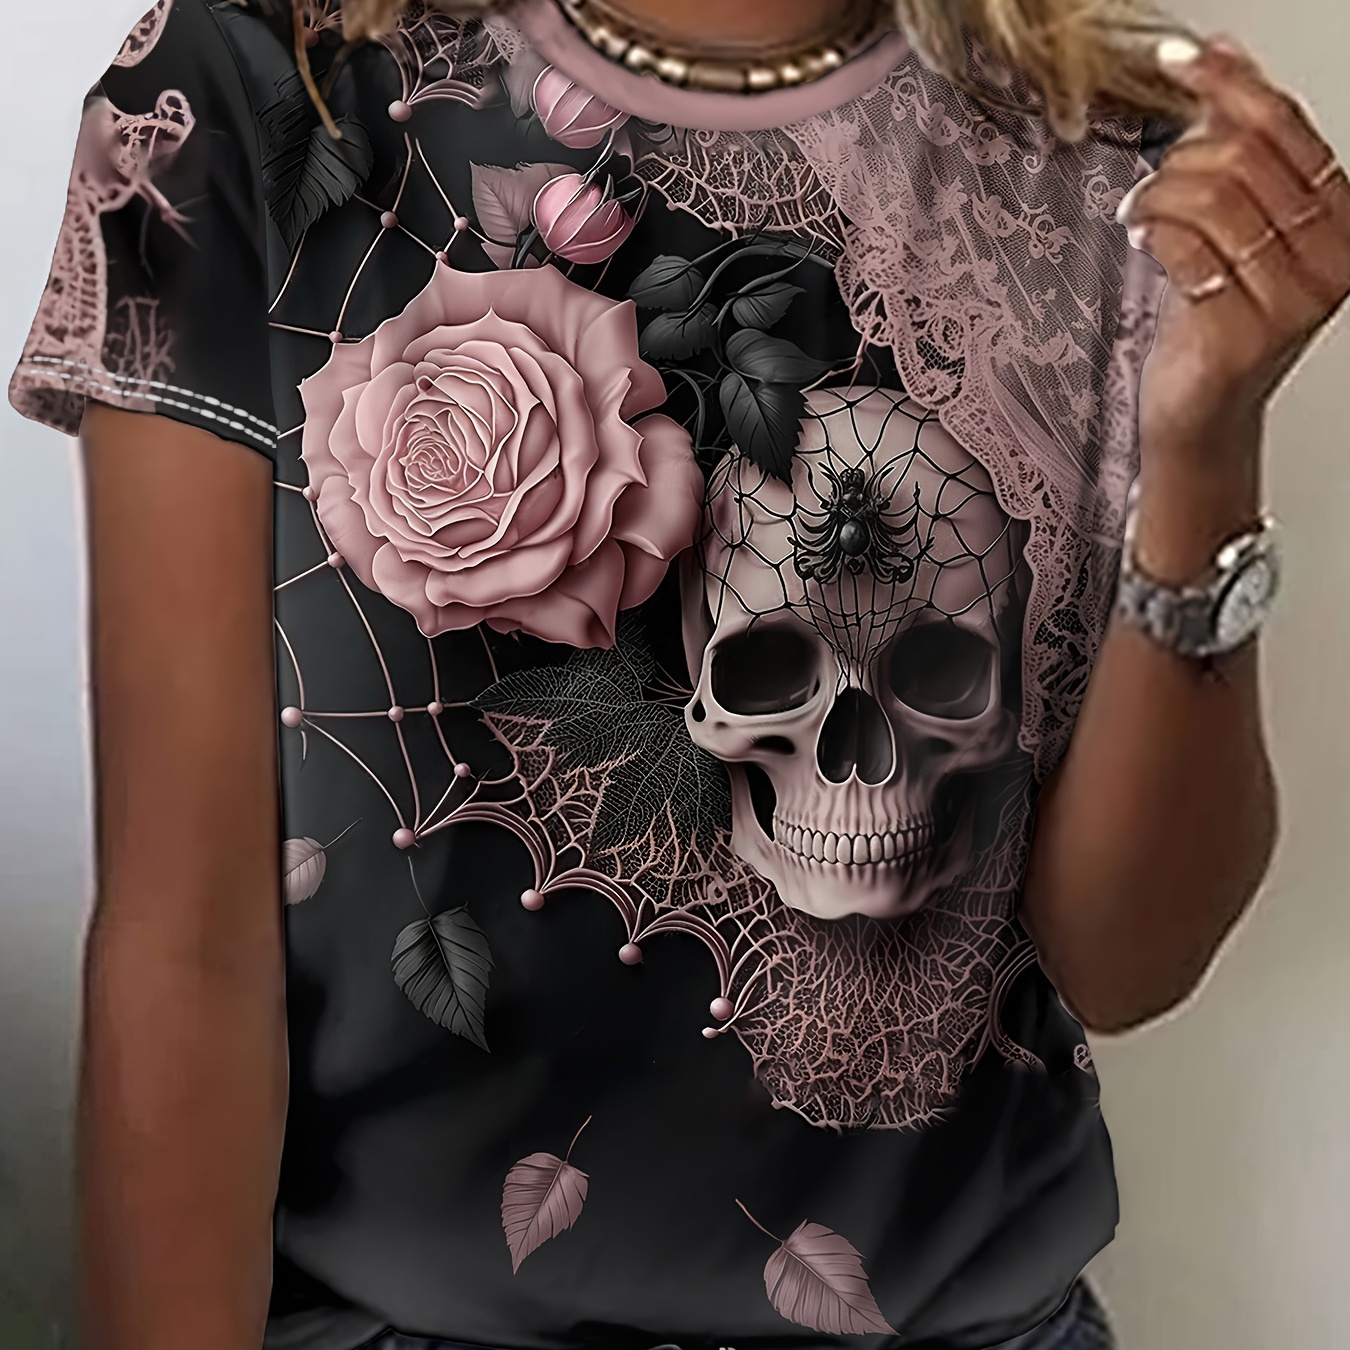 

Floral & Skull Print T-shirt, Casual Short Sleeve Crew Neck Top For Spring & Summer, Women's Clothing